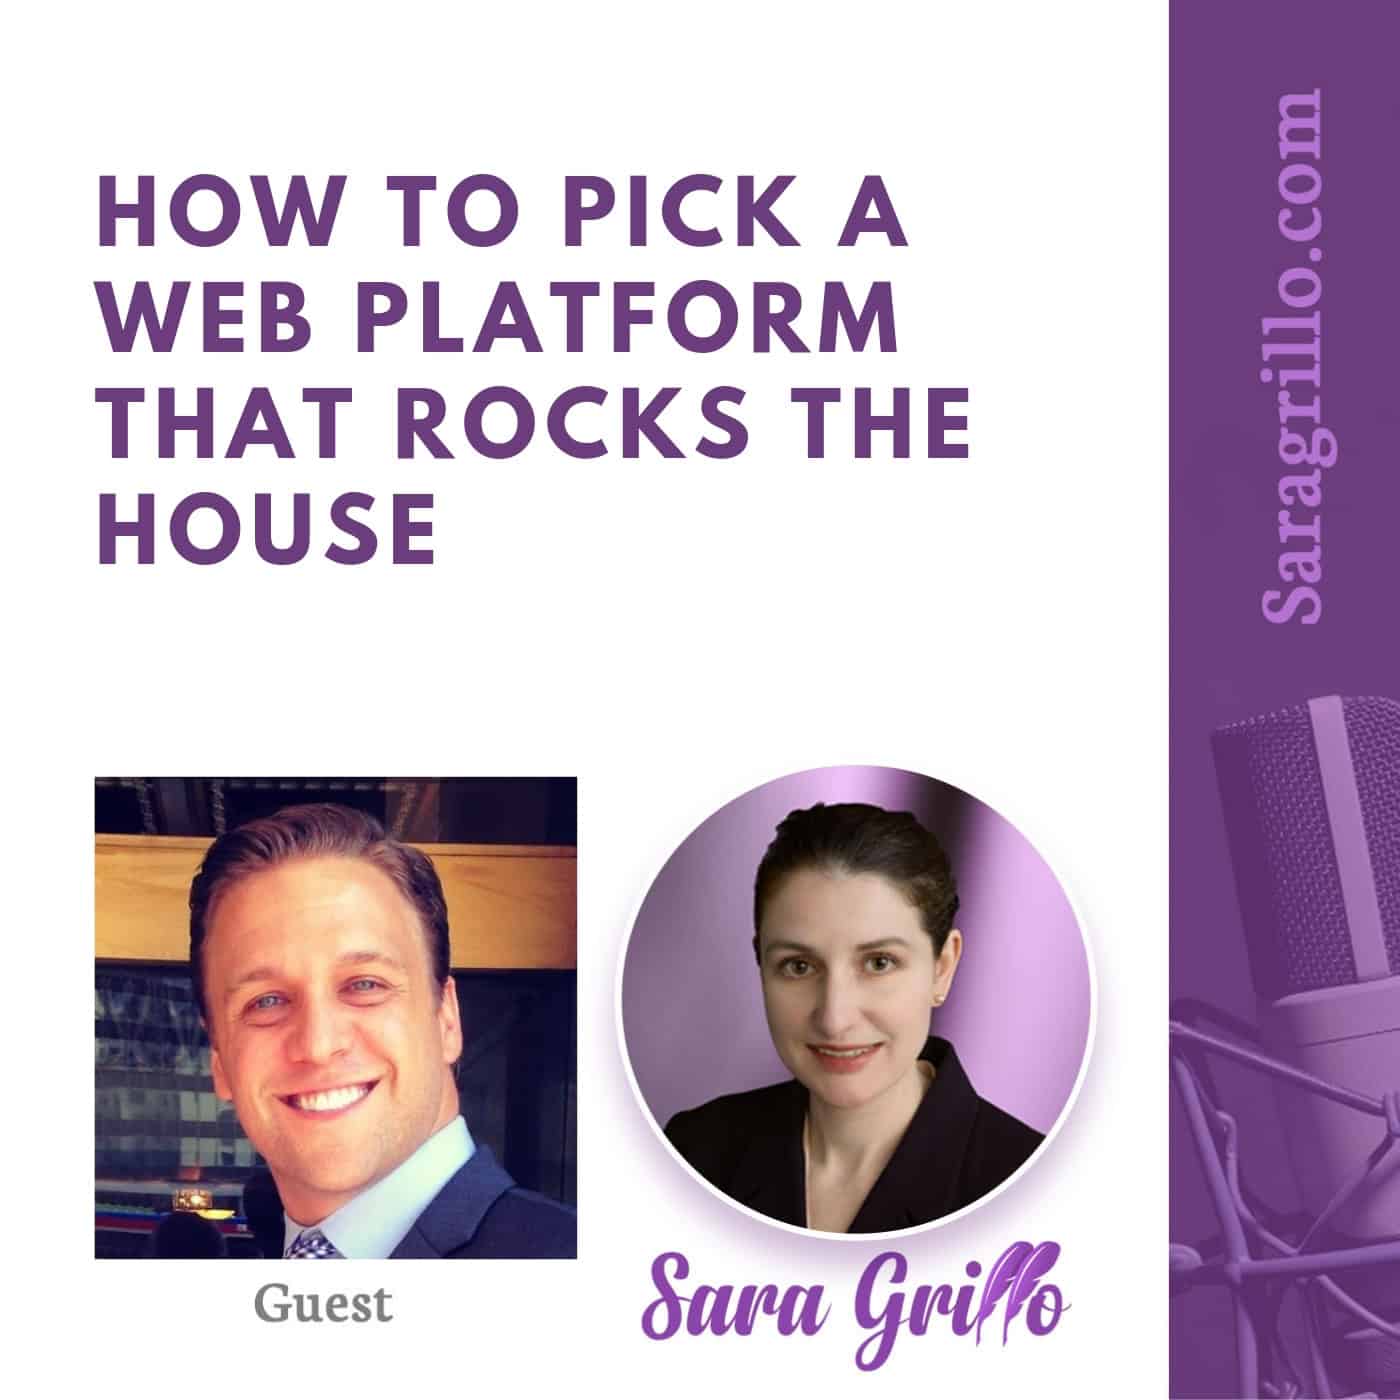 If you are a financial advisor firm here is how to pick a website platform that rocks.